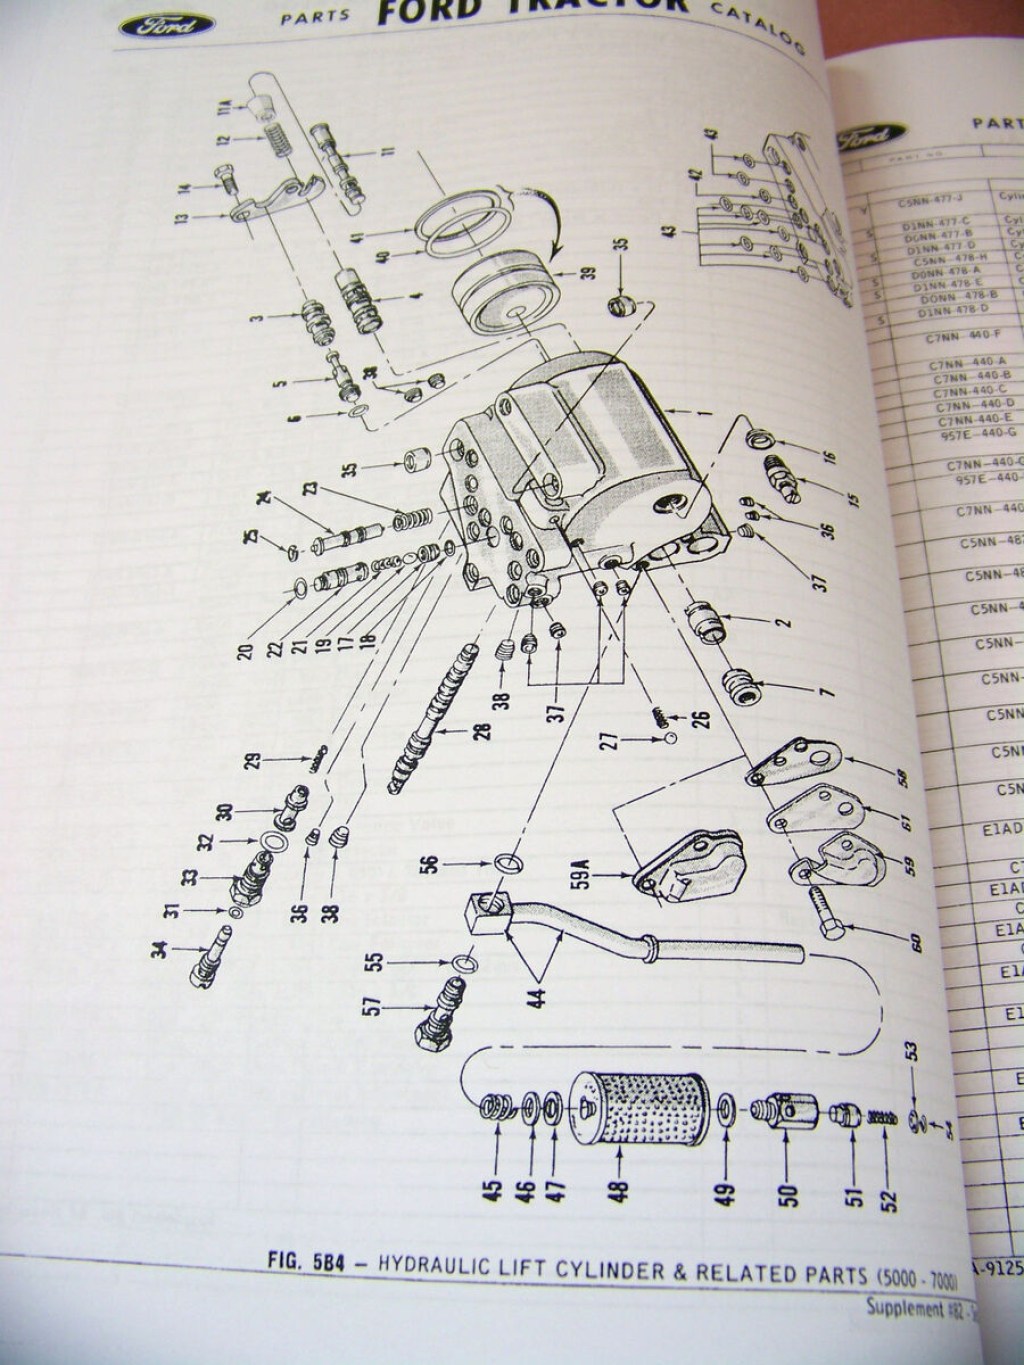 Picture of: Ford     Industrial Loader Backhoe Tractor Parts Manual  Catalog